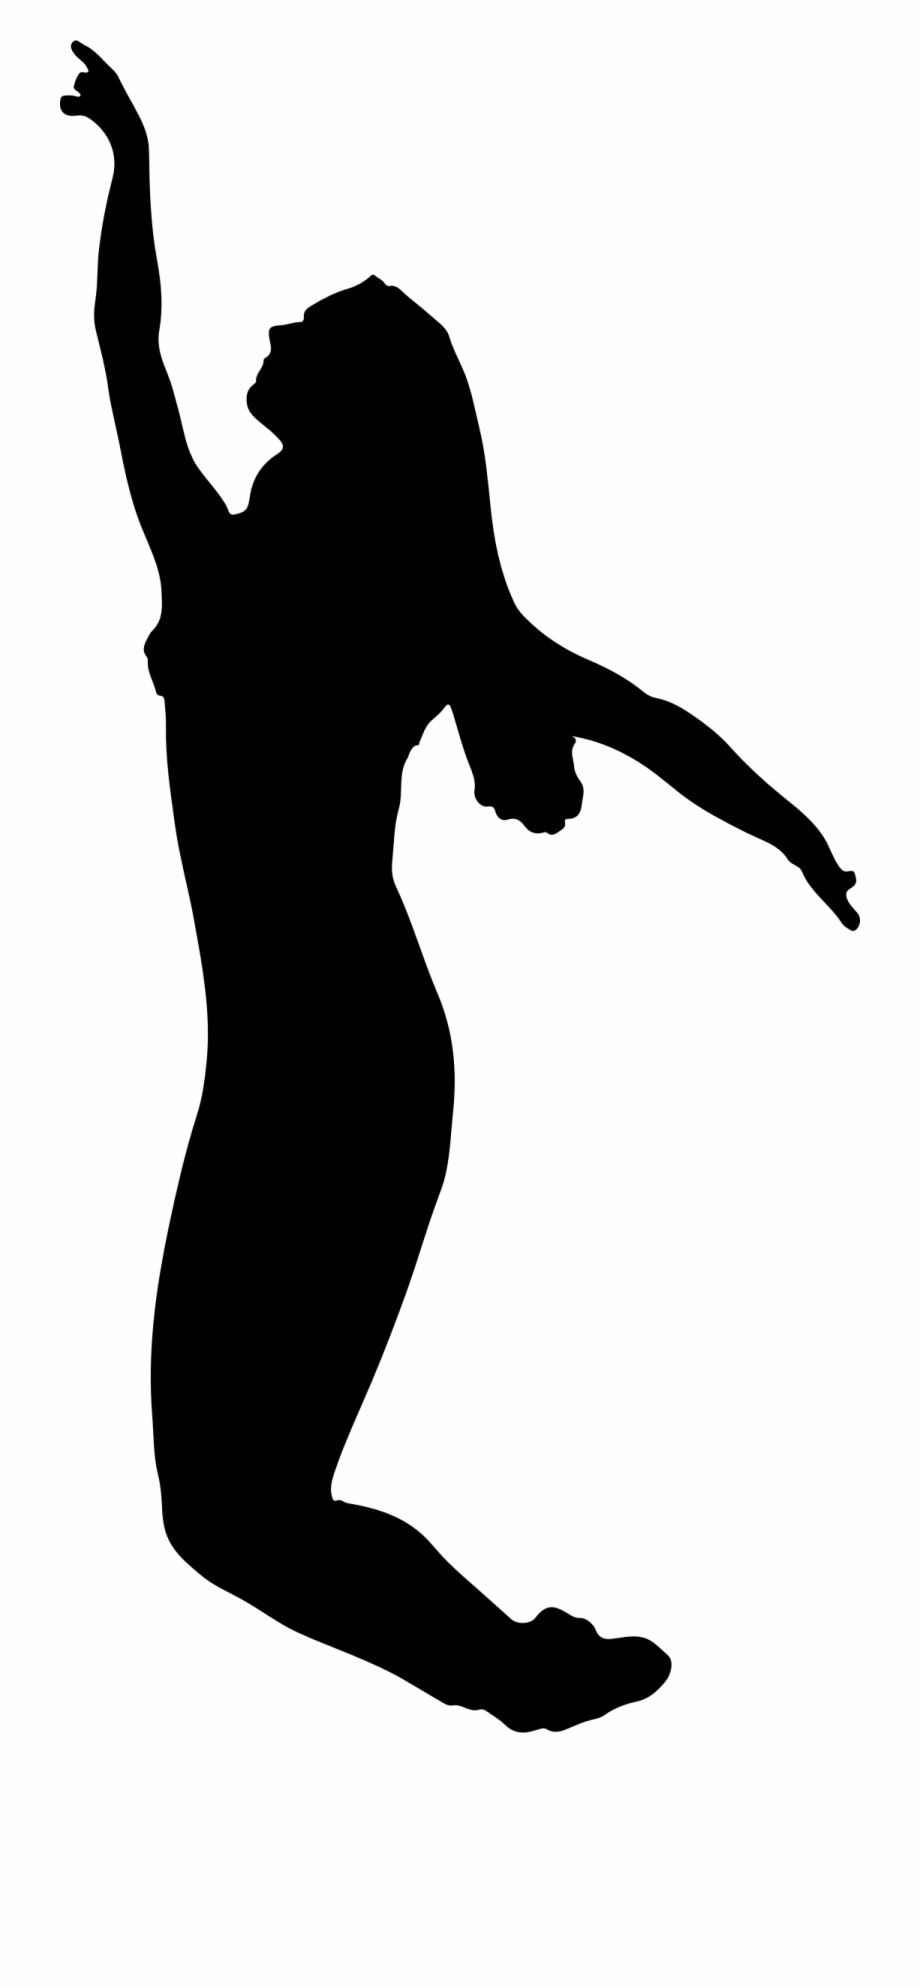 This Free Icons Png Design Of Ballerina Silhouette